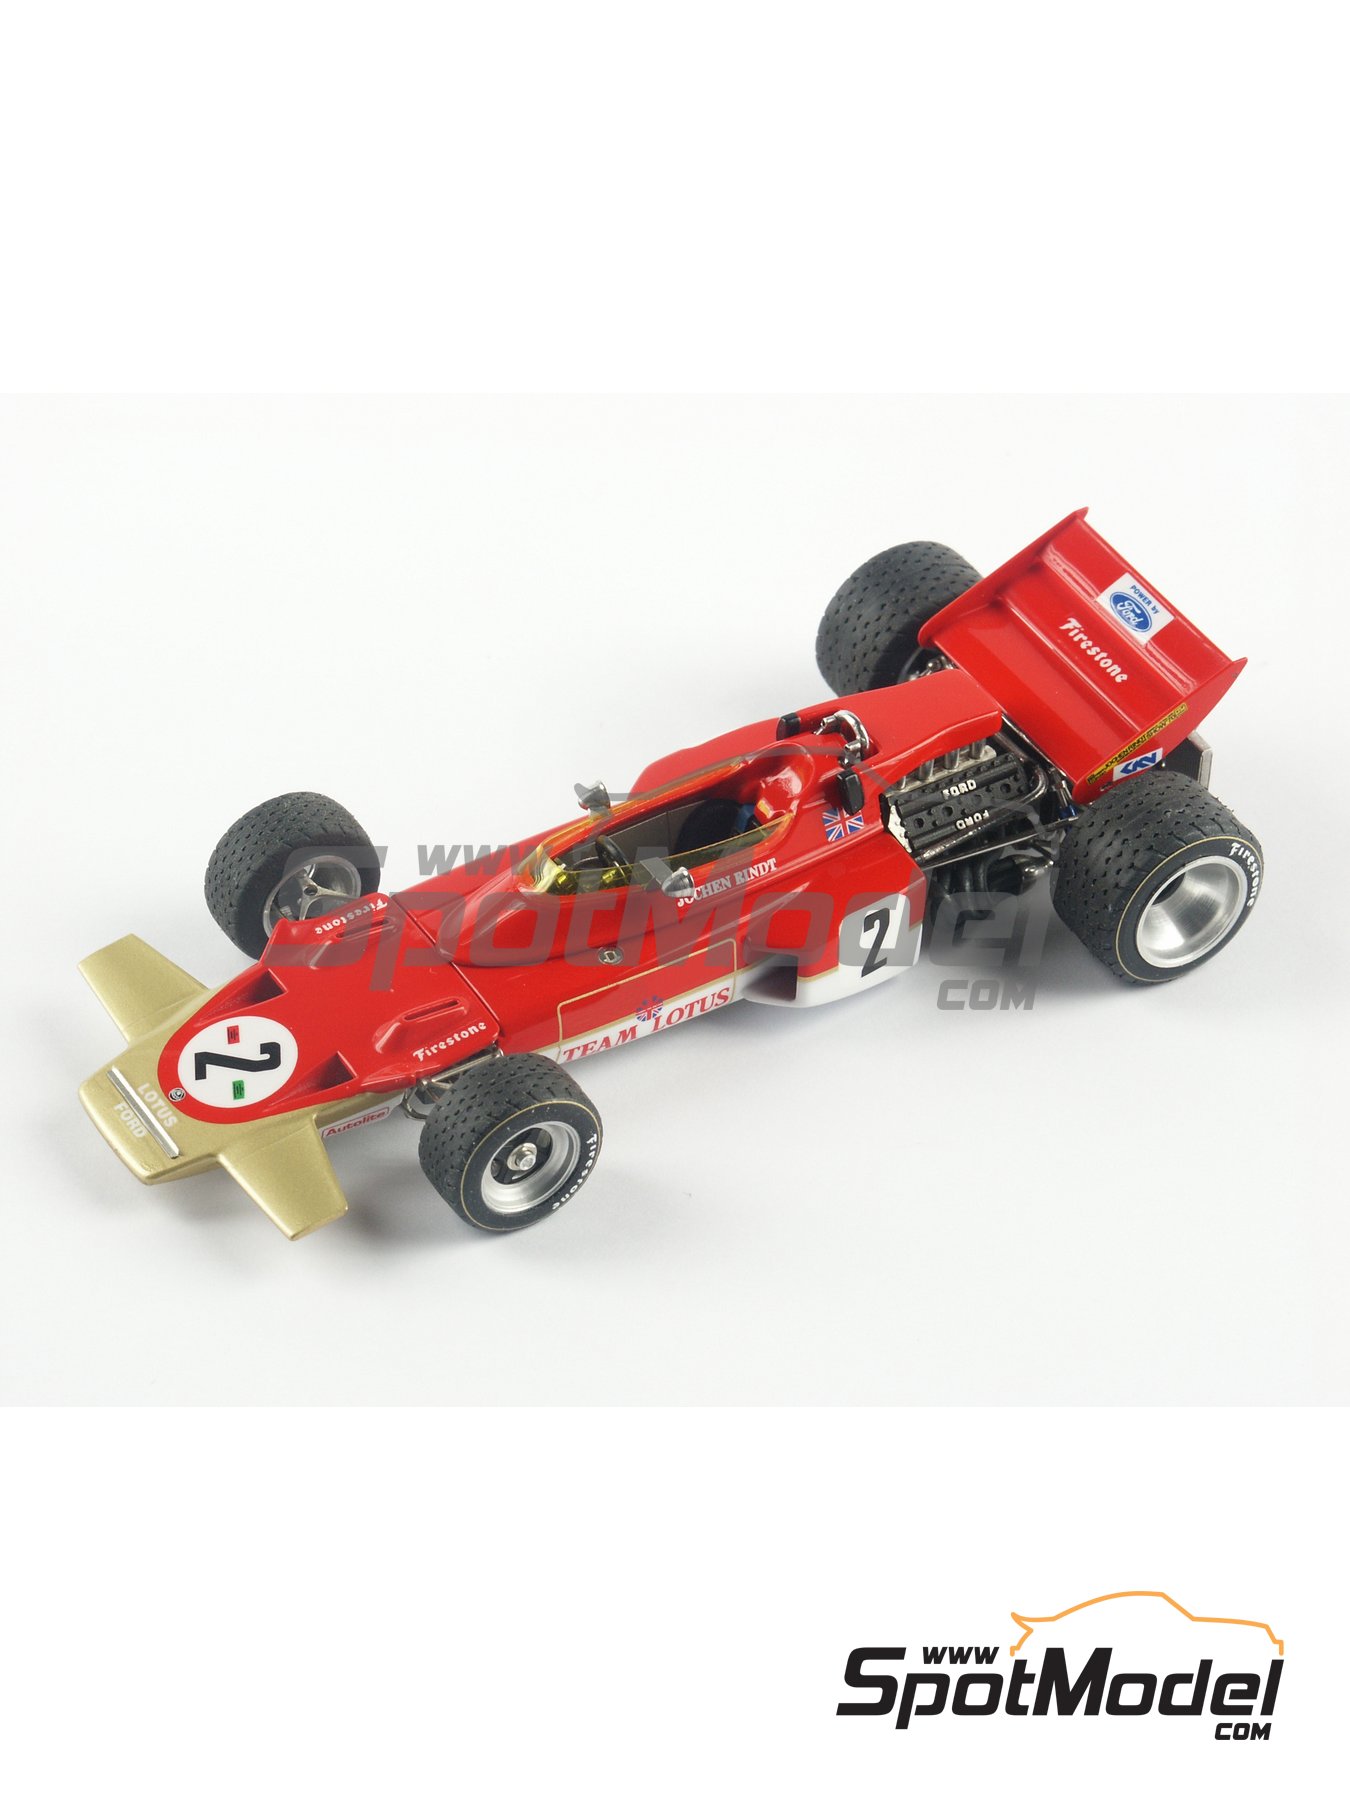 Lotus Ford 72 Lotus Team sponsored by Gold Leaf - German Formula 1 Grand  Prix 1970. Car scale model kit in 1/43 scale manufactured by Tameo Kits  (ref.